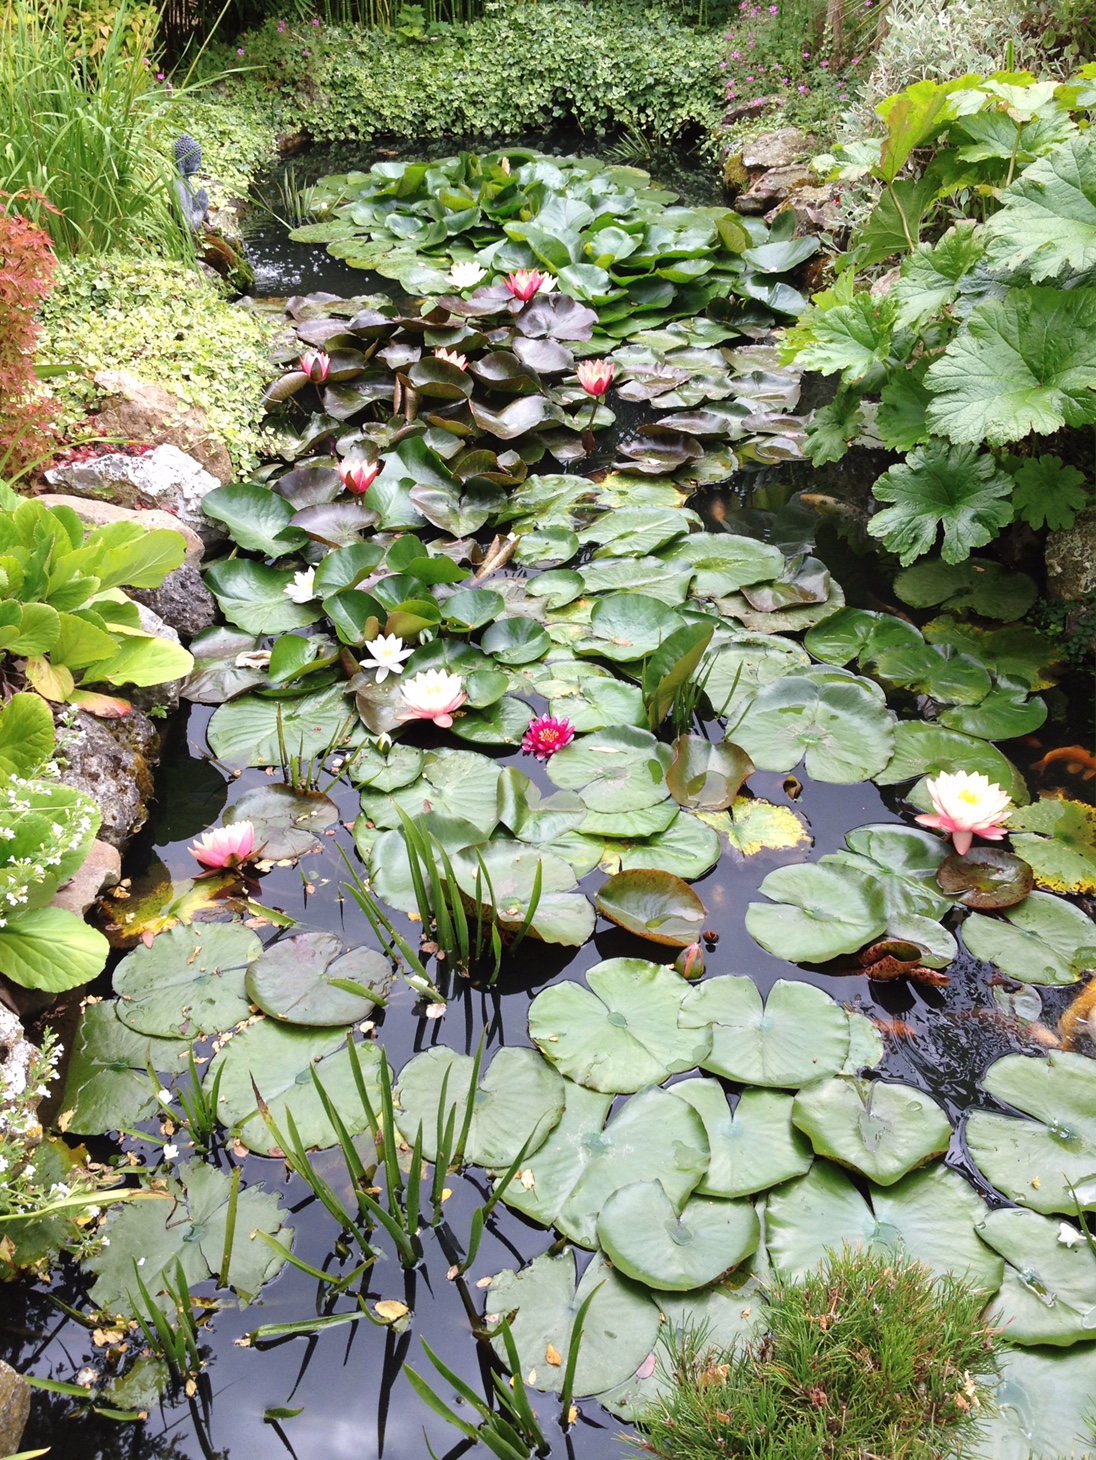 Lilies in a french town garden pond.